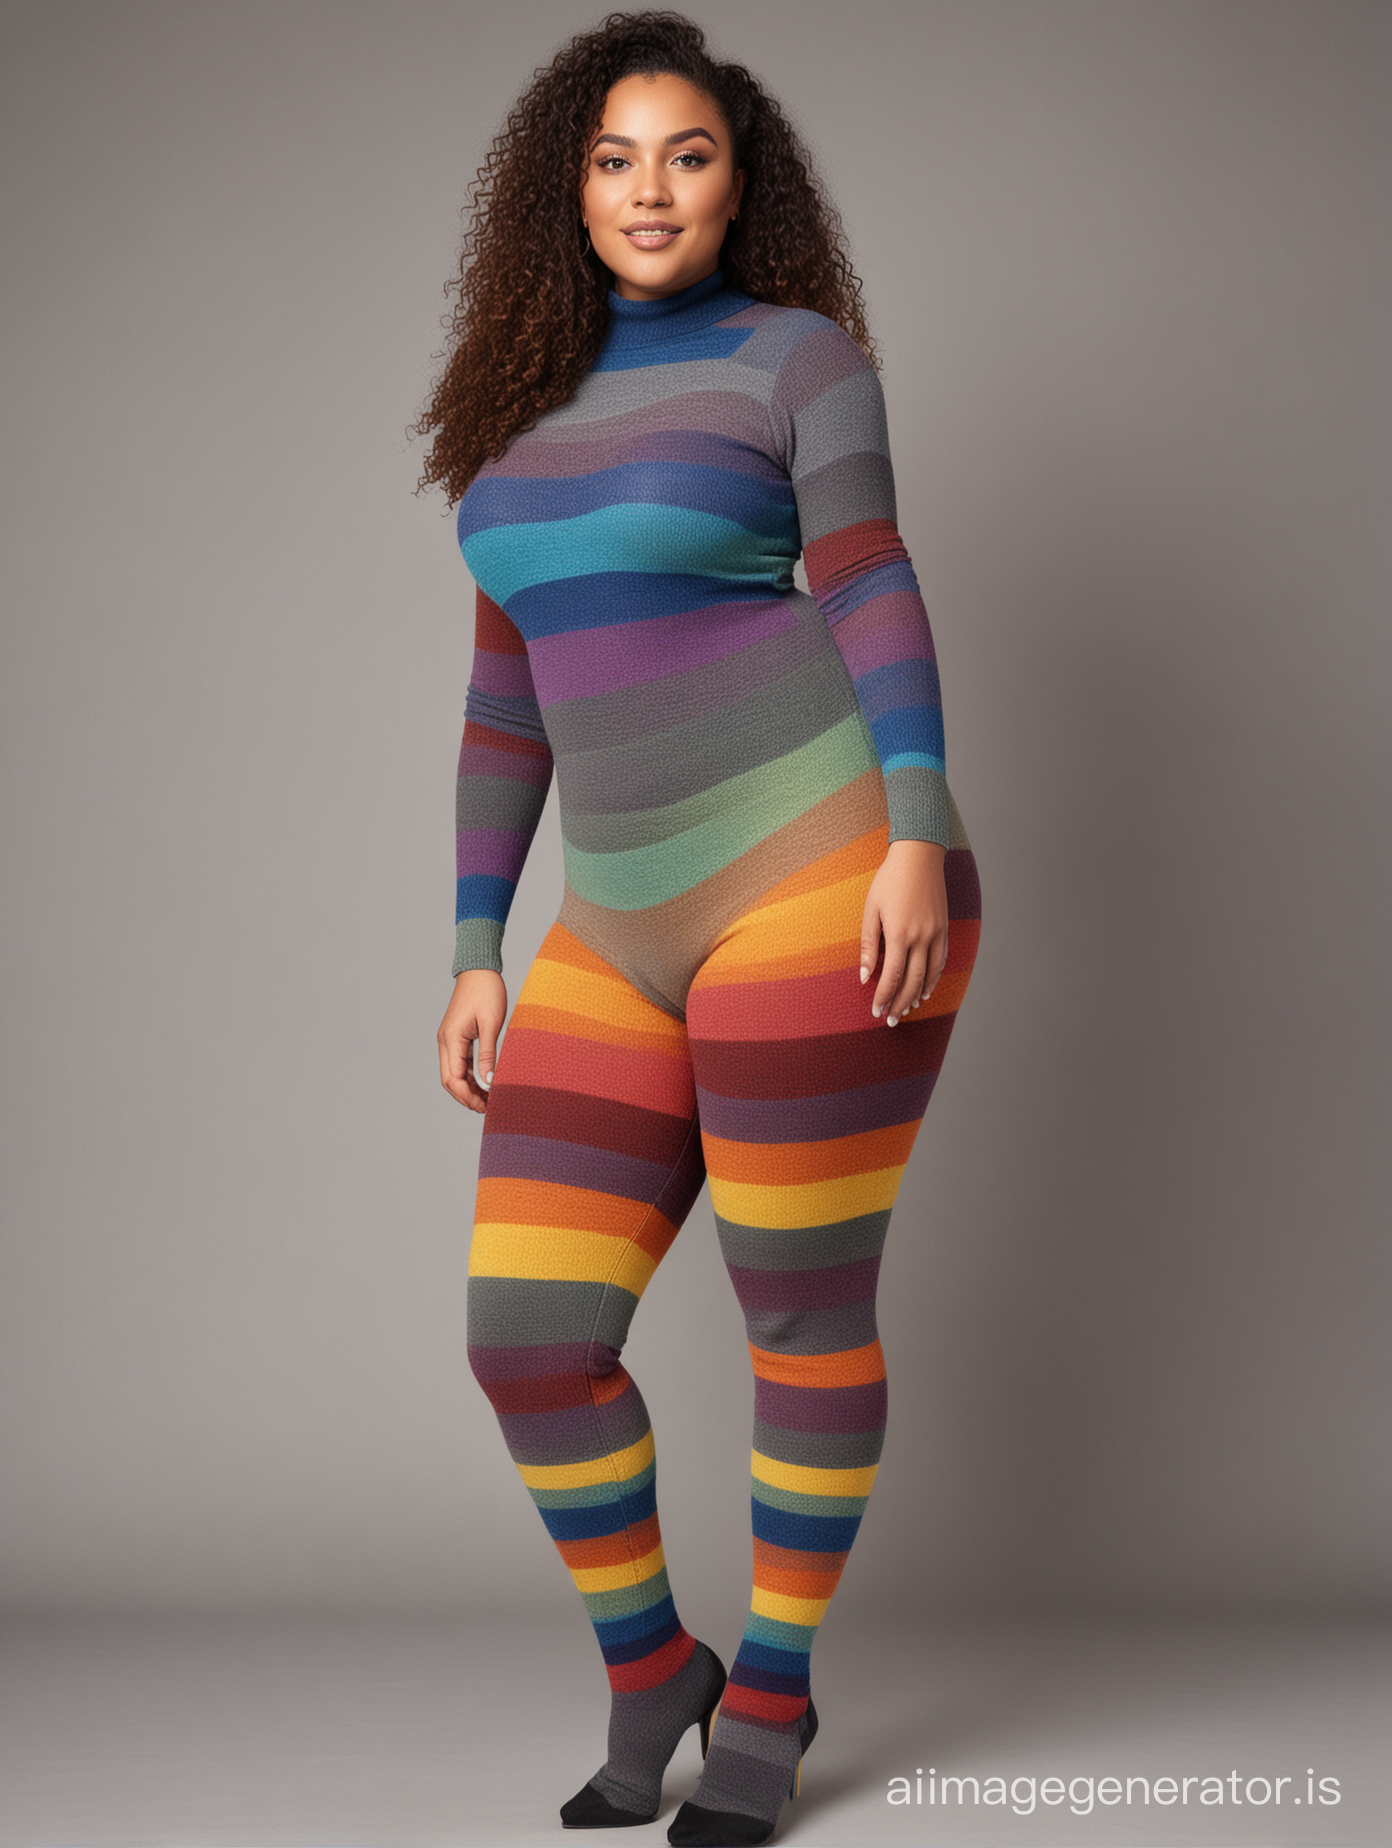 curvy woman full body "extra thick textured rainbow wool tights"